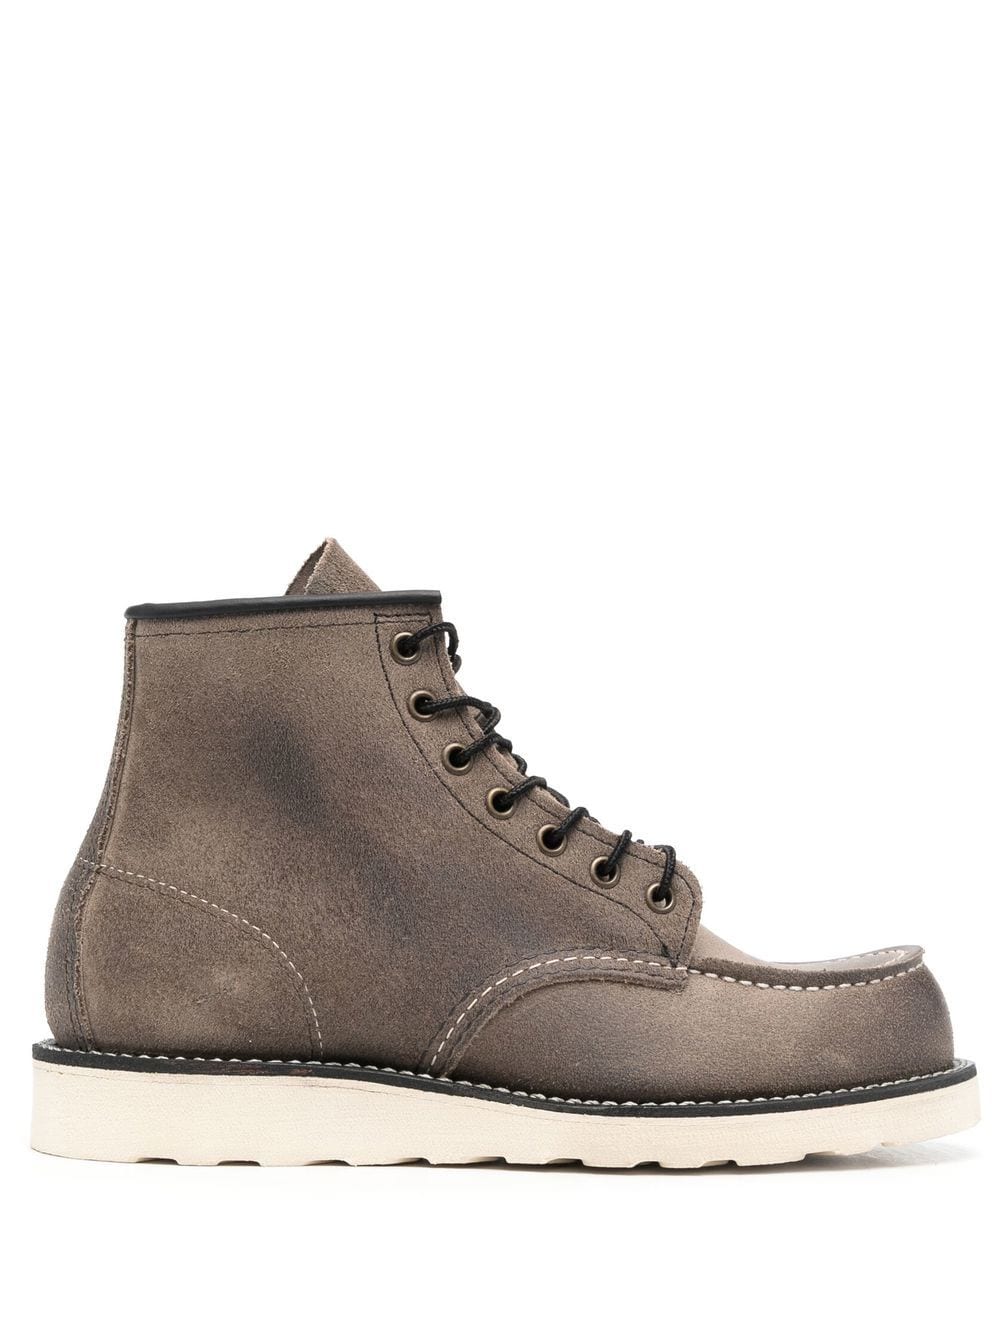 RED WING SHOES LACE-UP ANKLE BOOTS